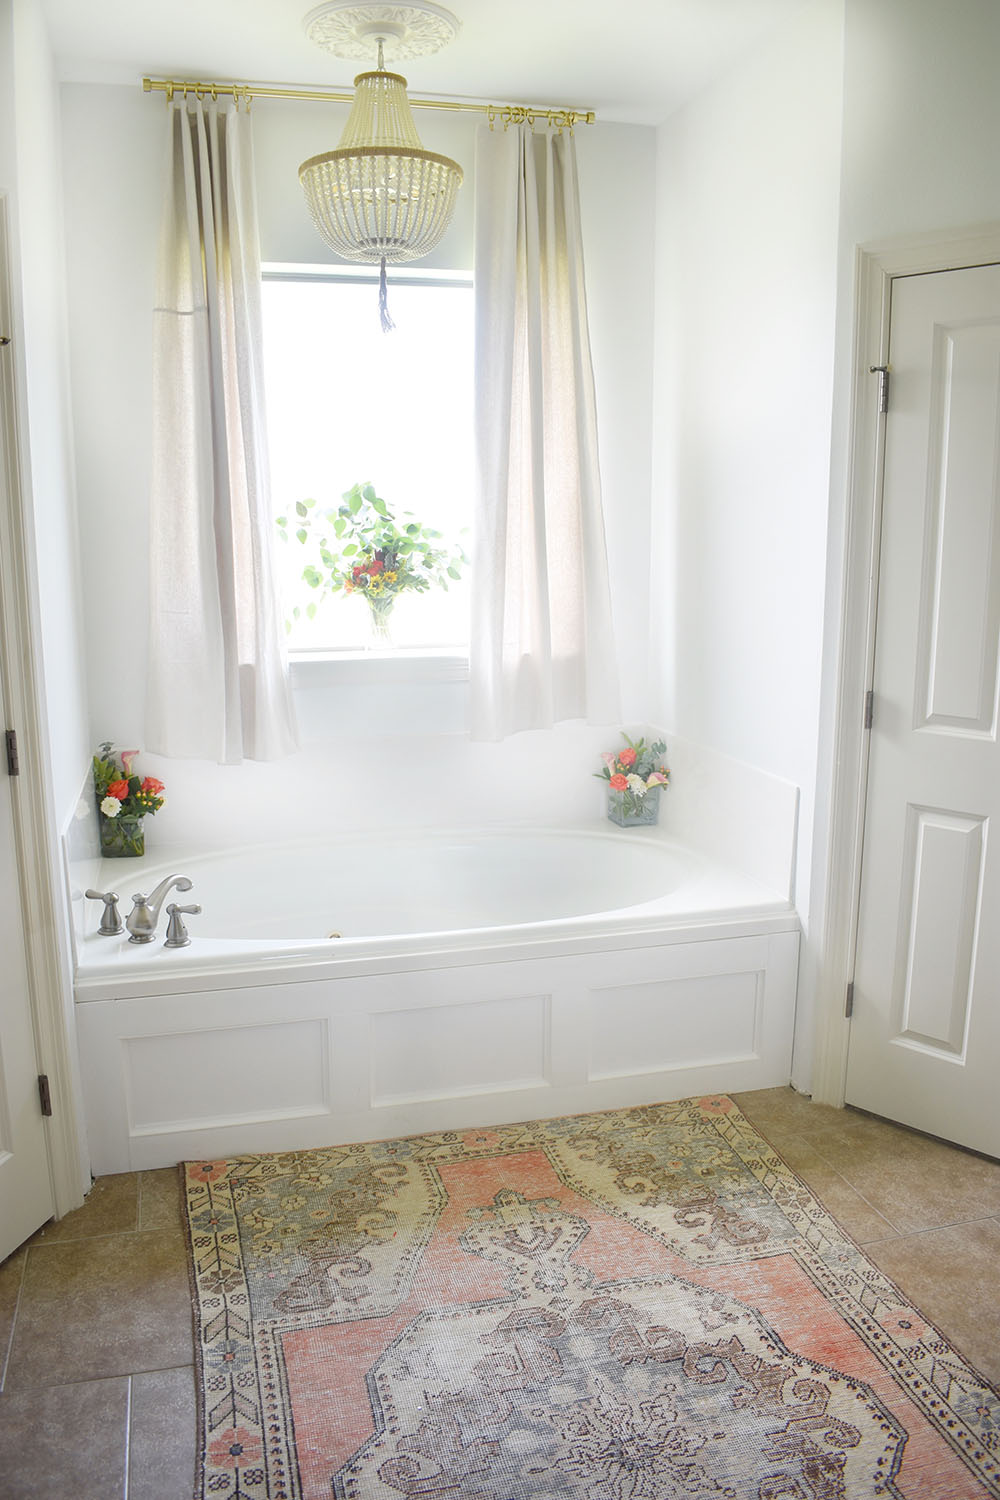 An bathtub updated with white decorative moulding.